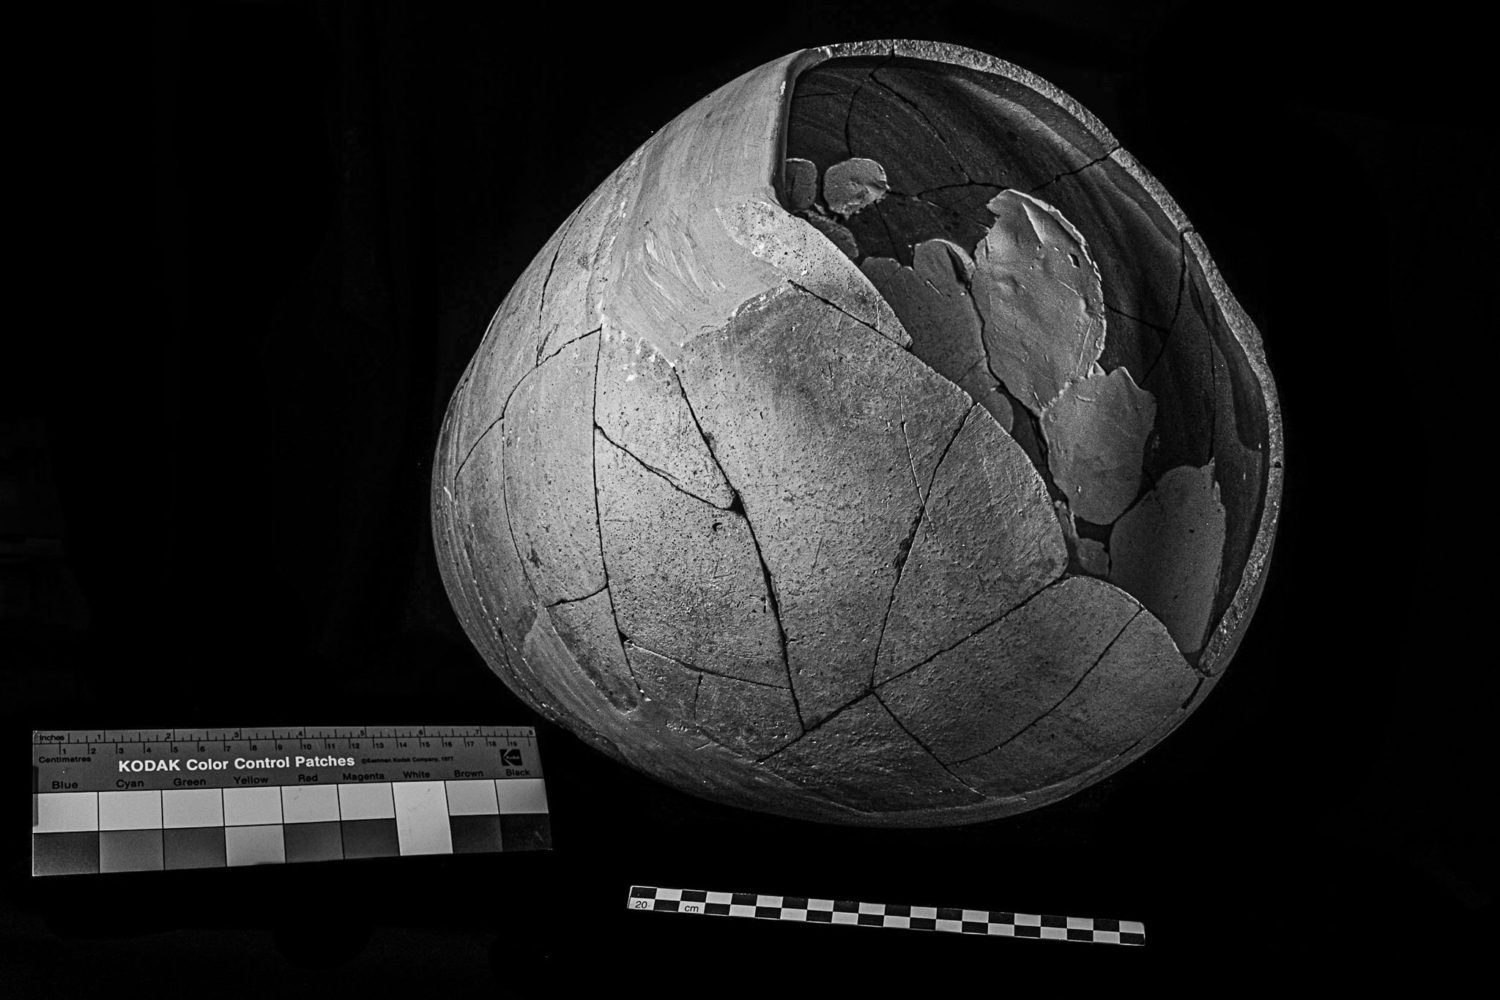 An amphora, staged with a view of the opening showing the patched interior holding the pieces of the artifact together. A Kodak color patch sheet sits on the left of the image.